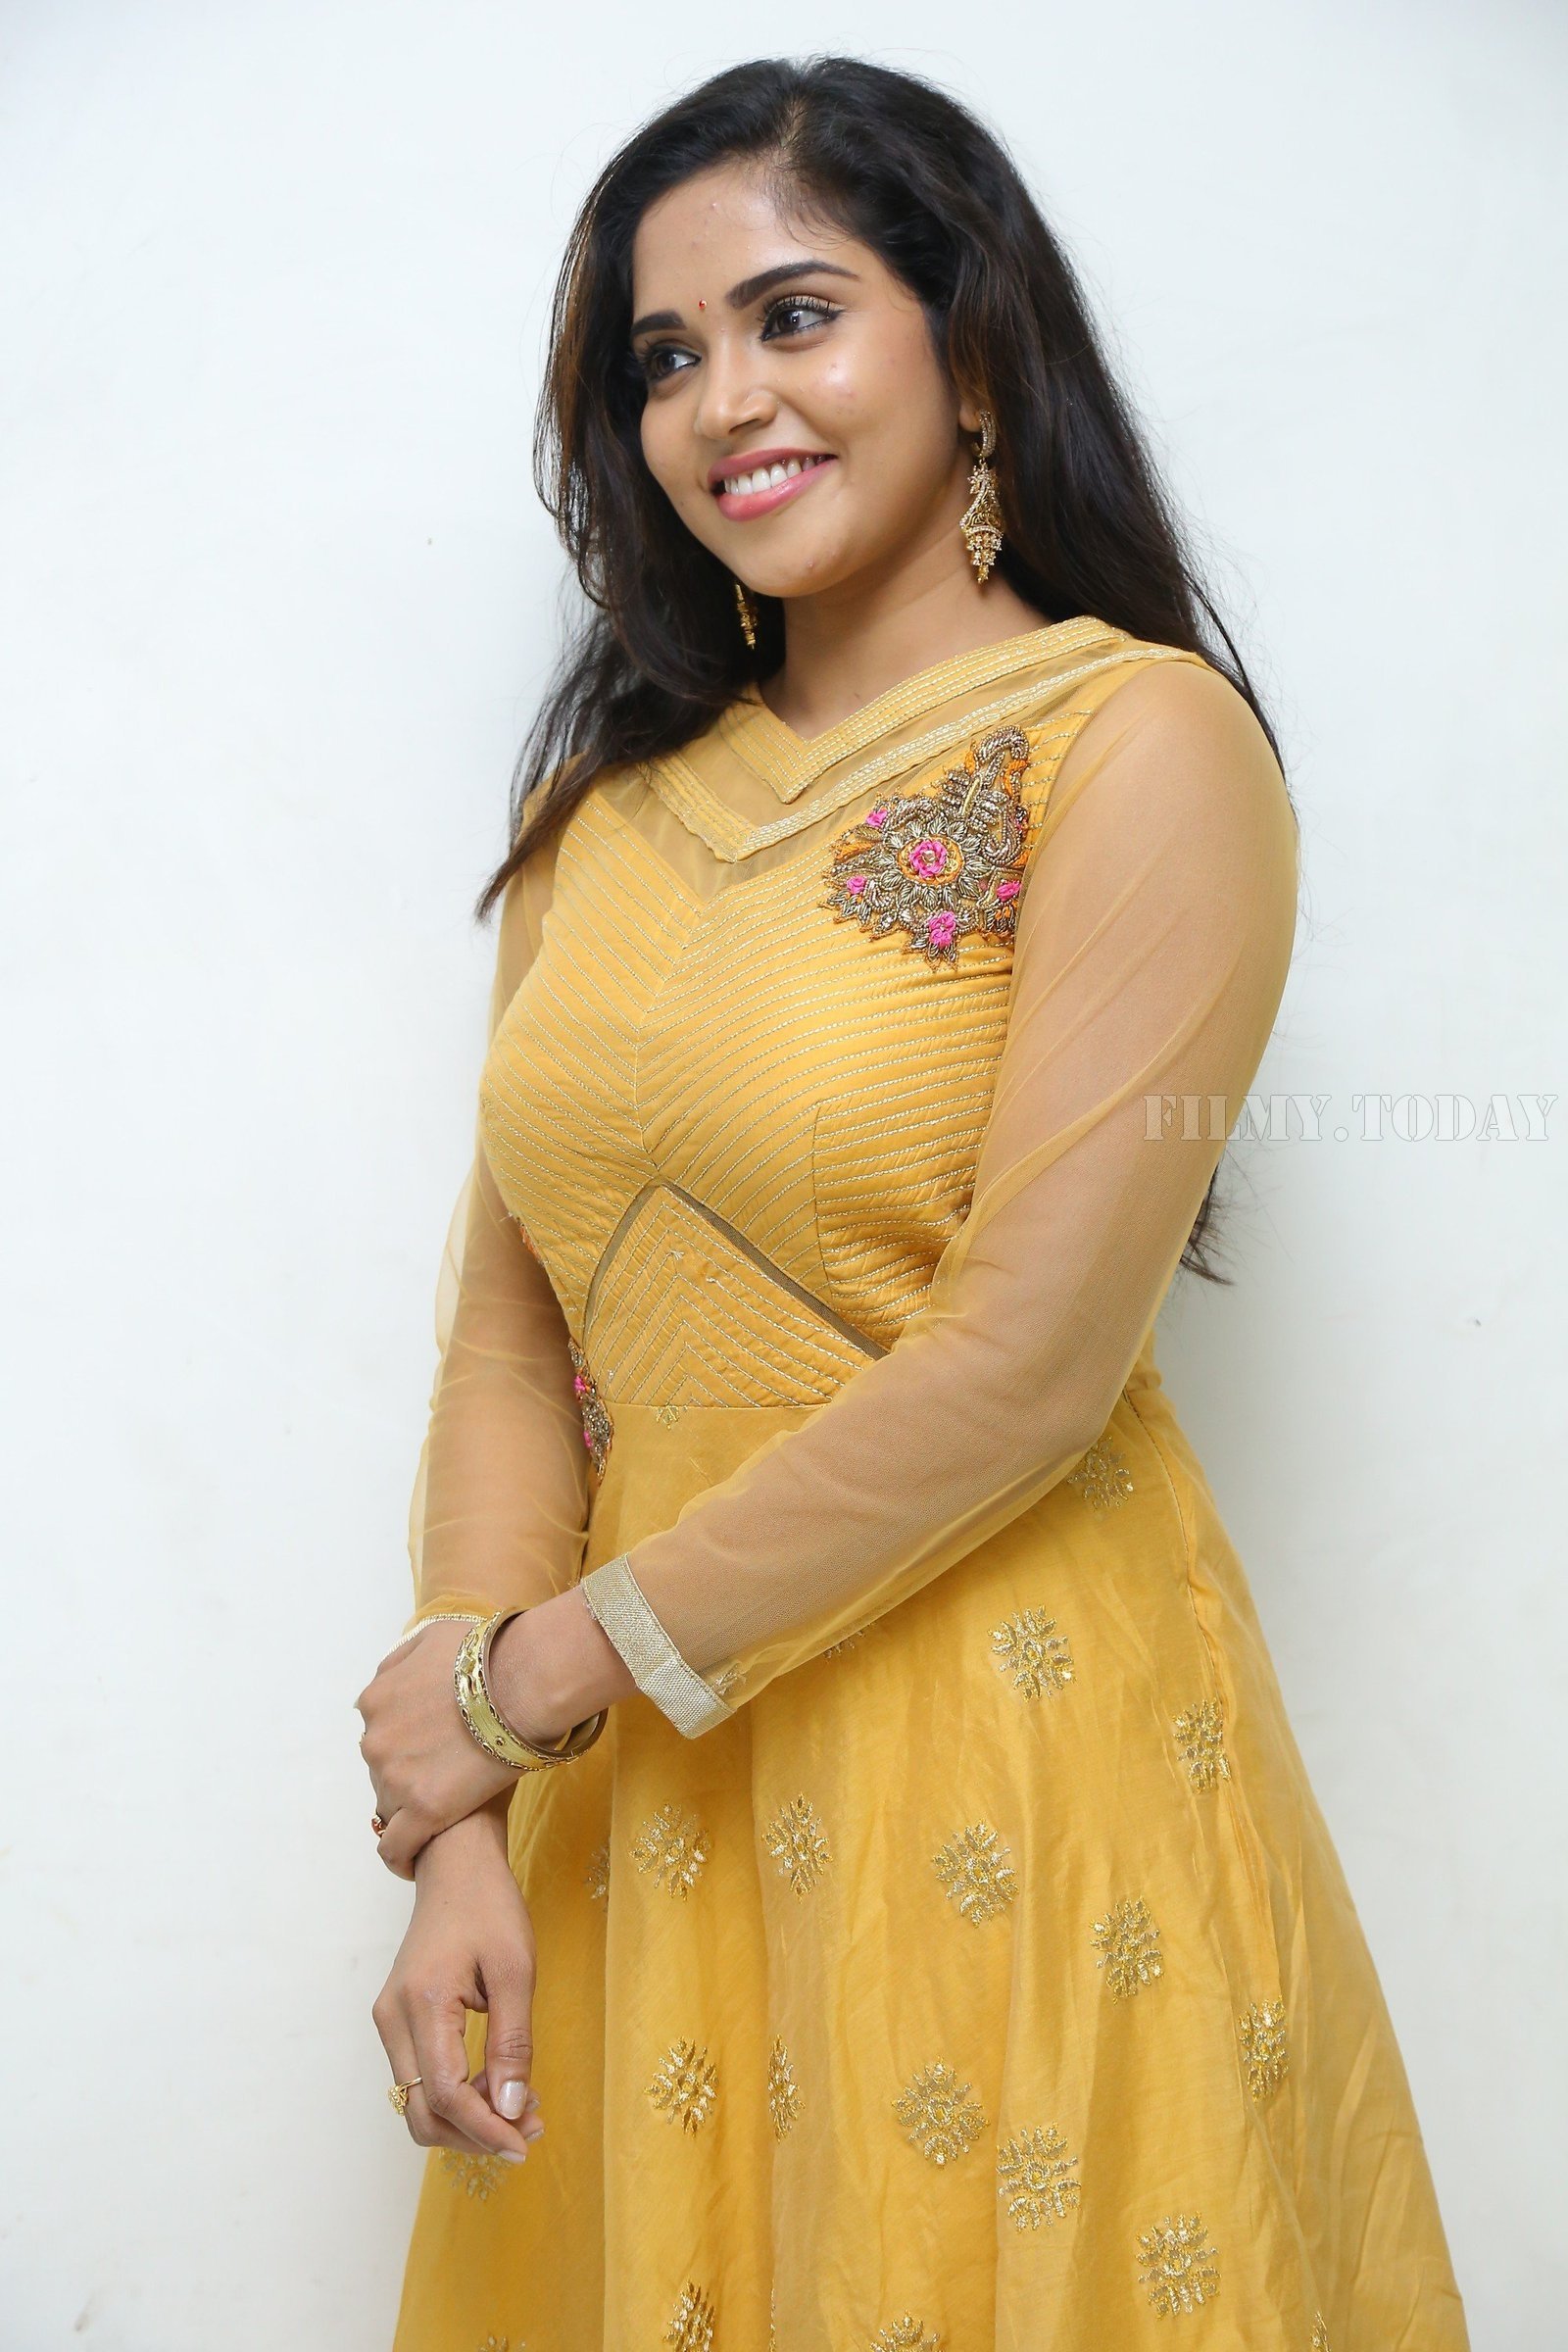 Karunya Chowdary at Seetha Ramuni Kosam First Look Launch Photos | Picture 1549314